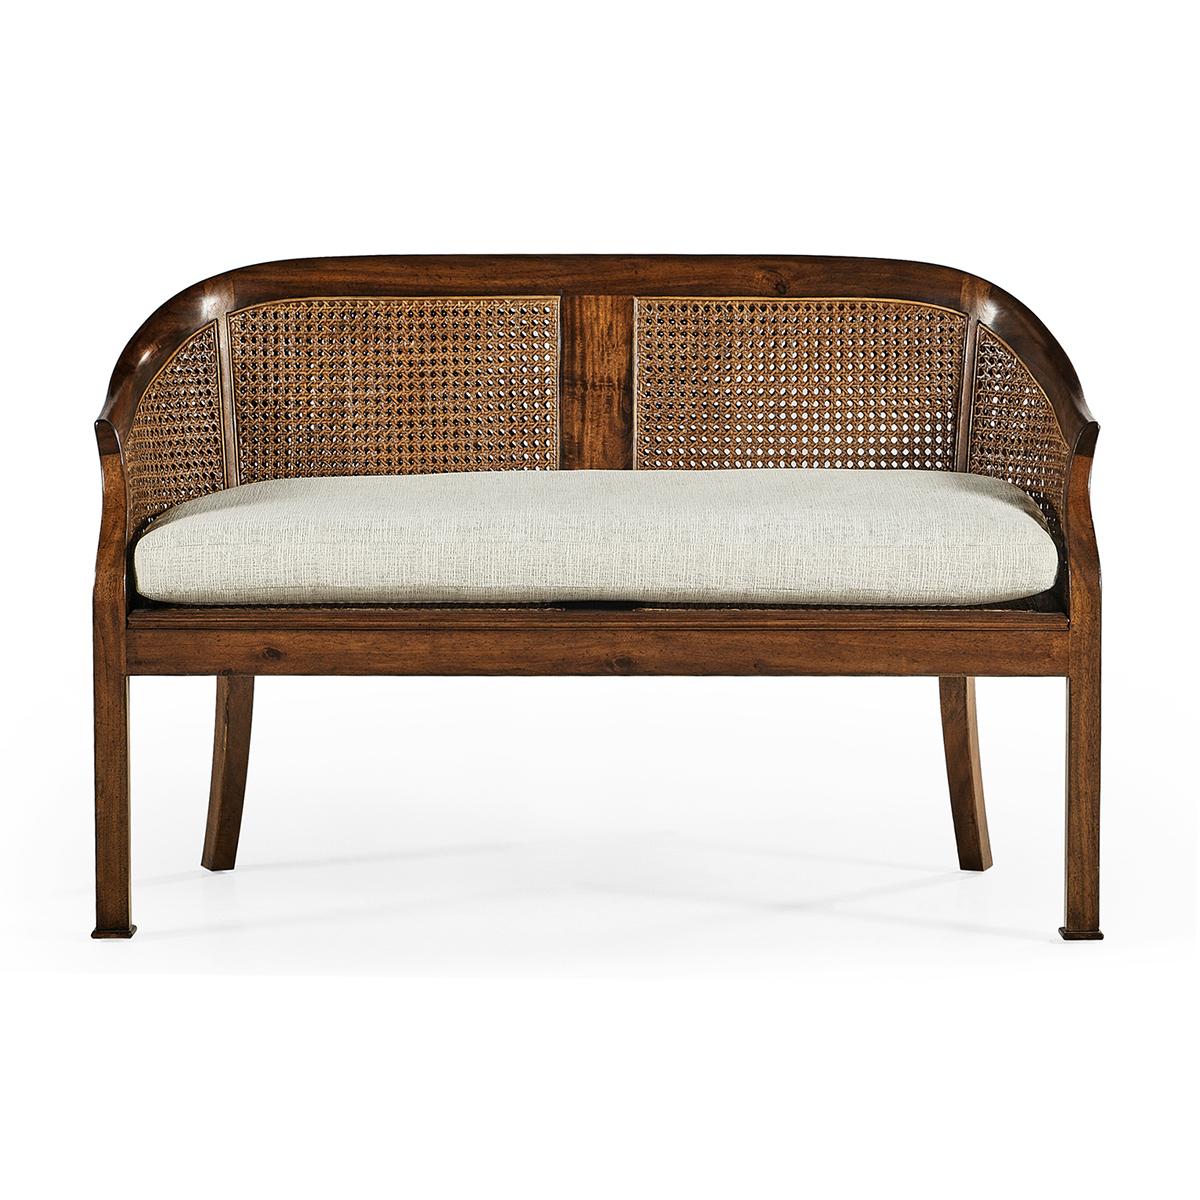 Georgian walnut two seater salon style settee with caned back and neutrally upholstered drop-in cushion, sweeping back rail and arms and with simple block feet.

Dimensions: 51.5